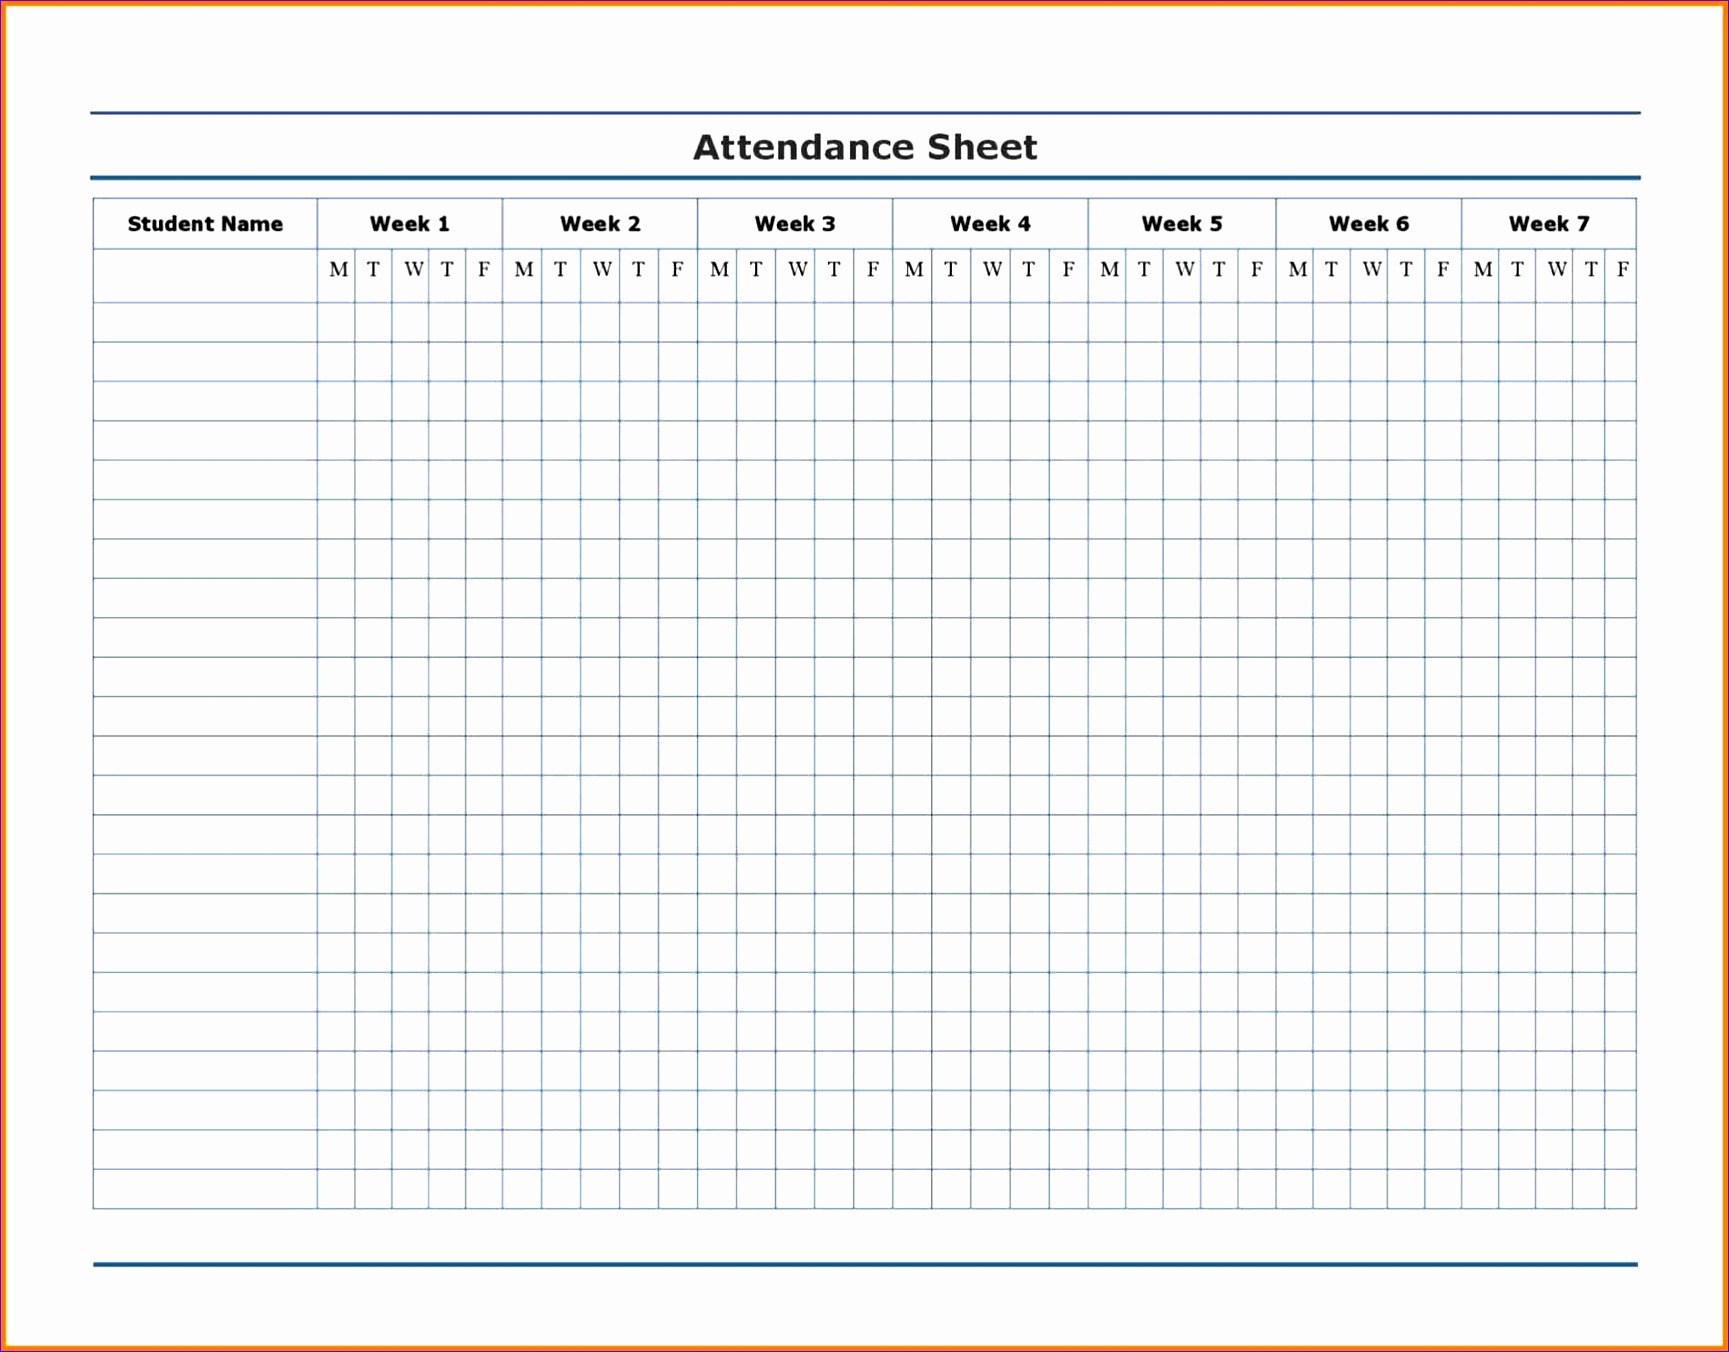 with employee Attendance Sheet Excel attendance sheet excel archives calendar printable with template for mailroom clerk attendance Attendance Sheet Excel sheet template